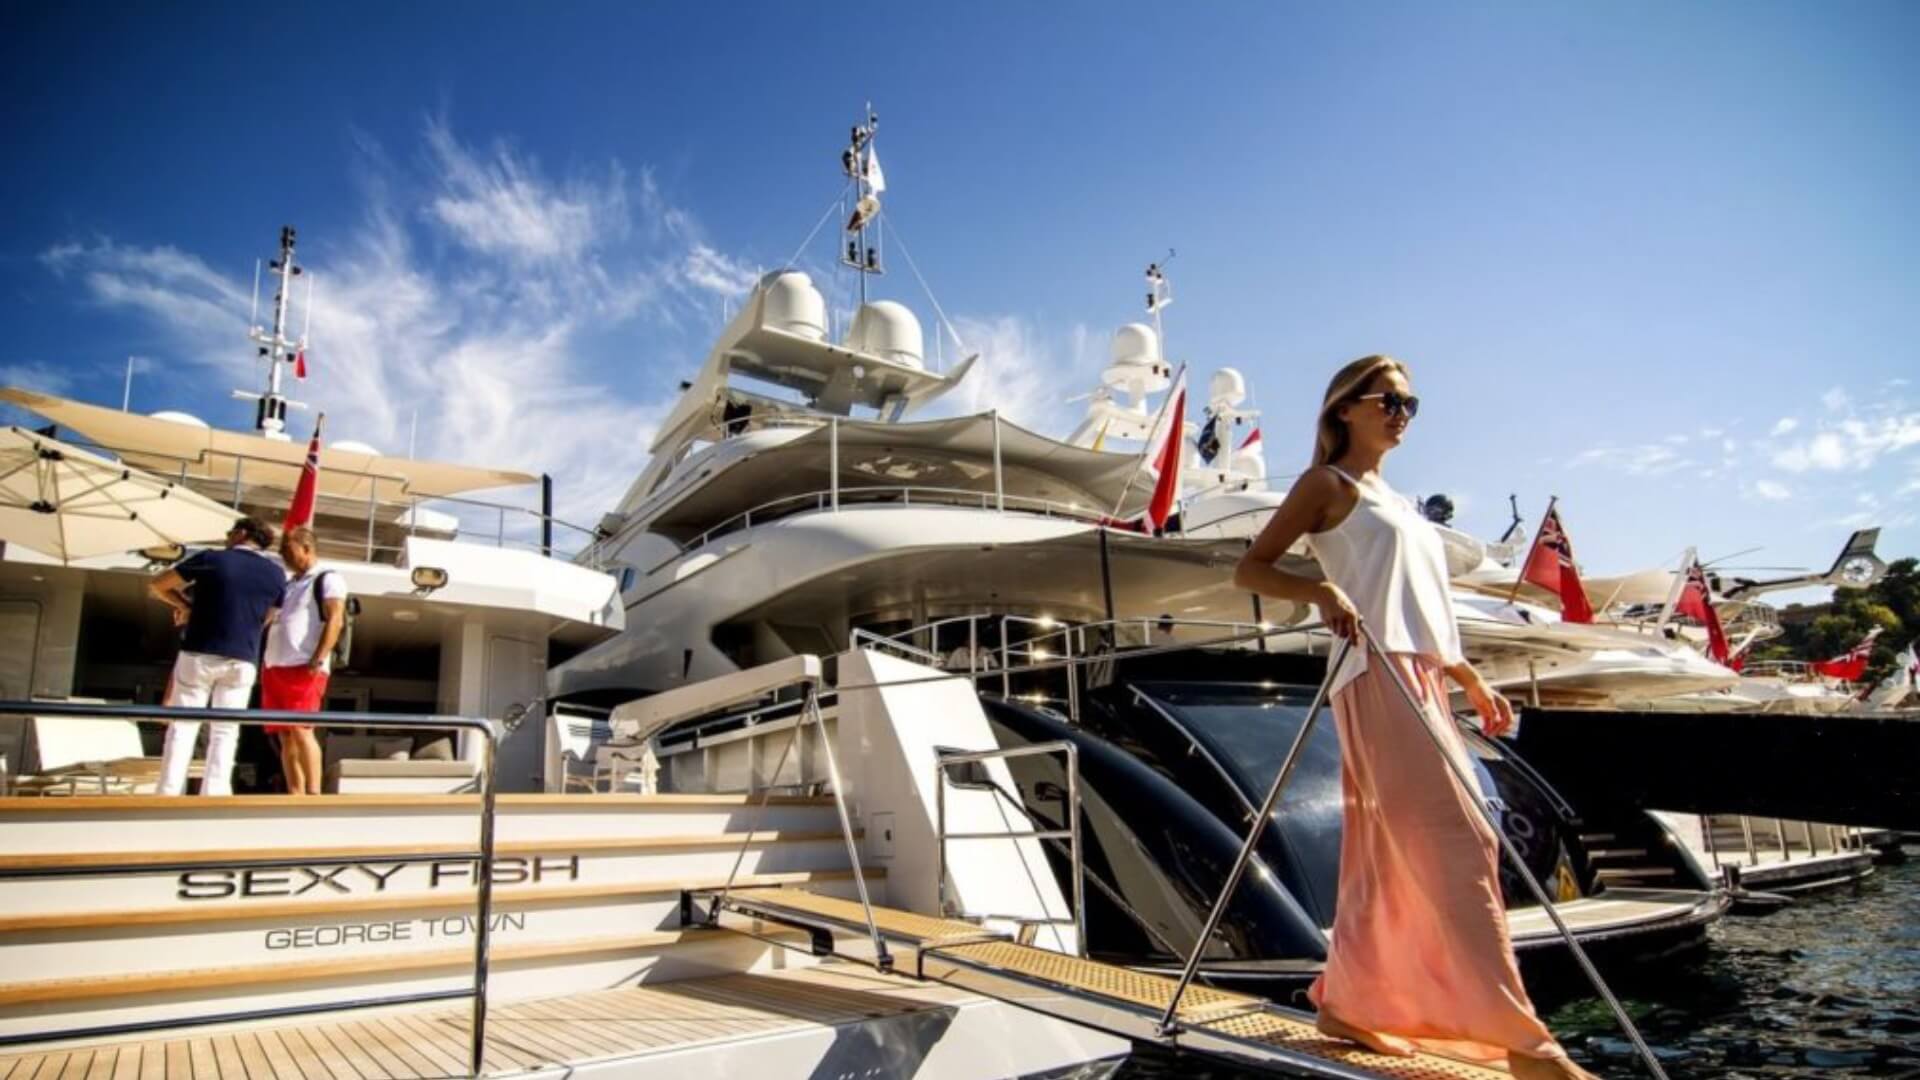 Planning a luxury yacht charter